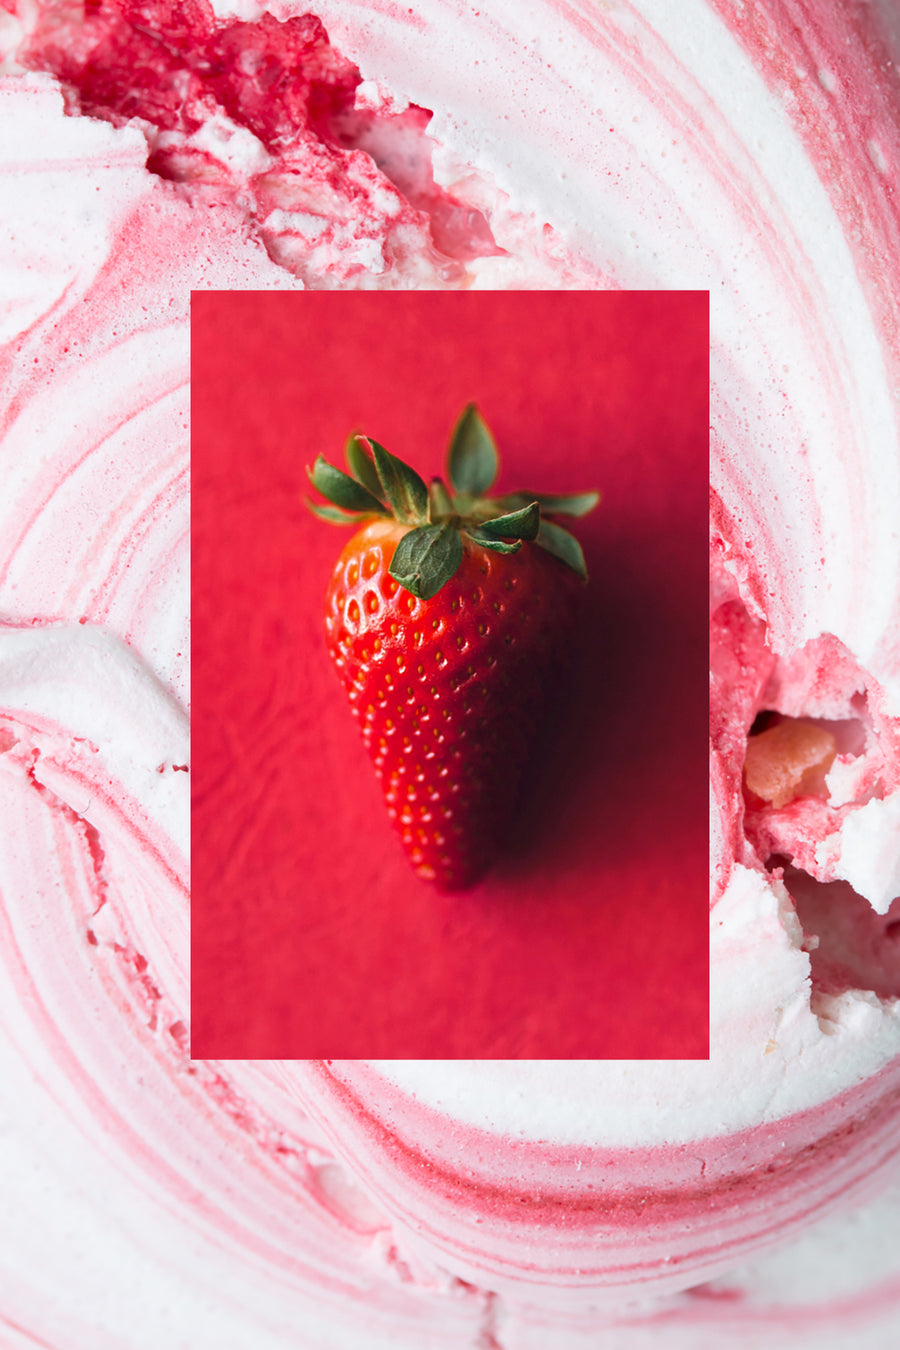 A single whole fresh strawberry on red background with strawberry cream swirl